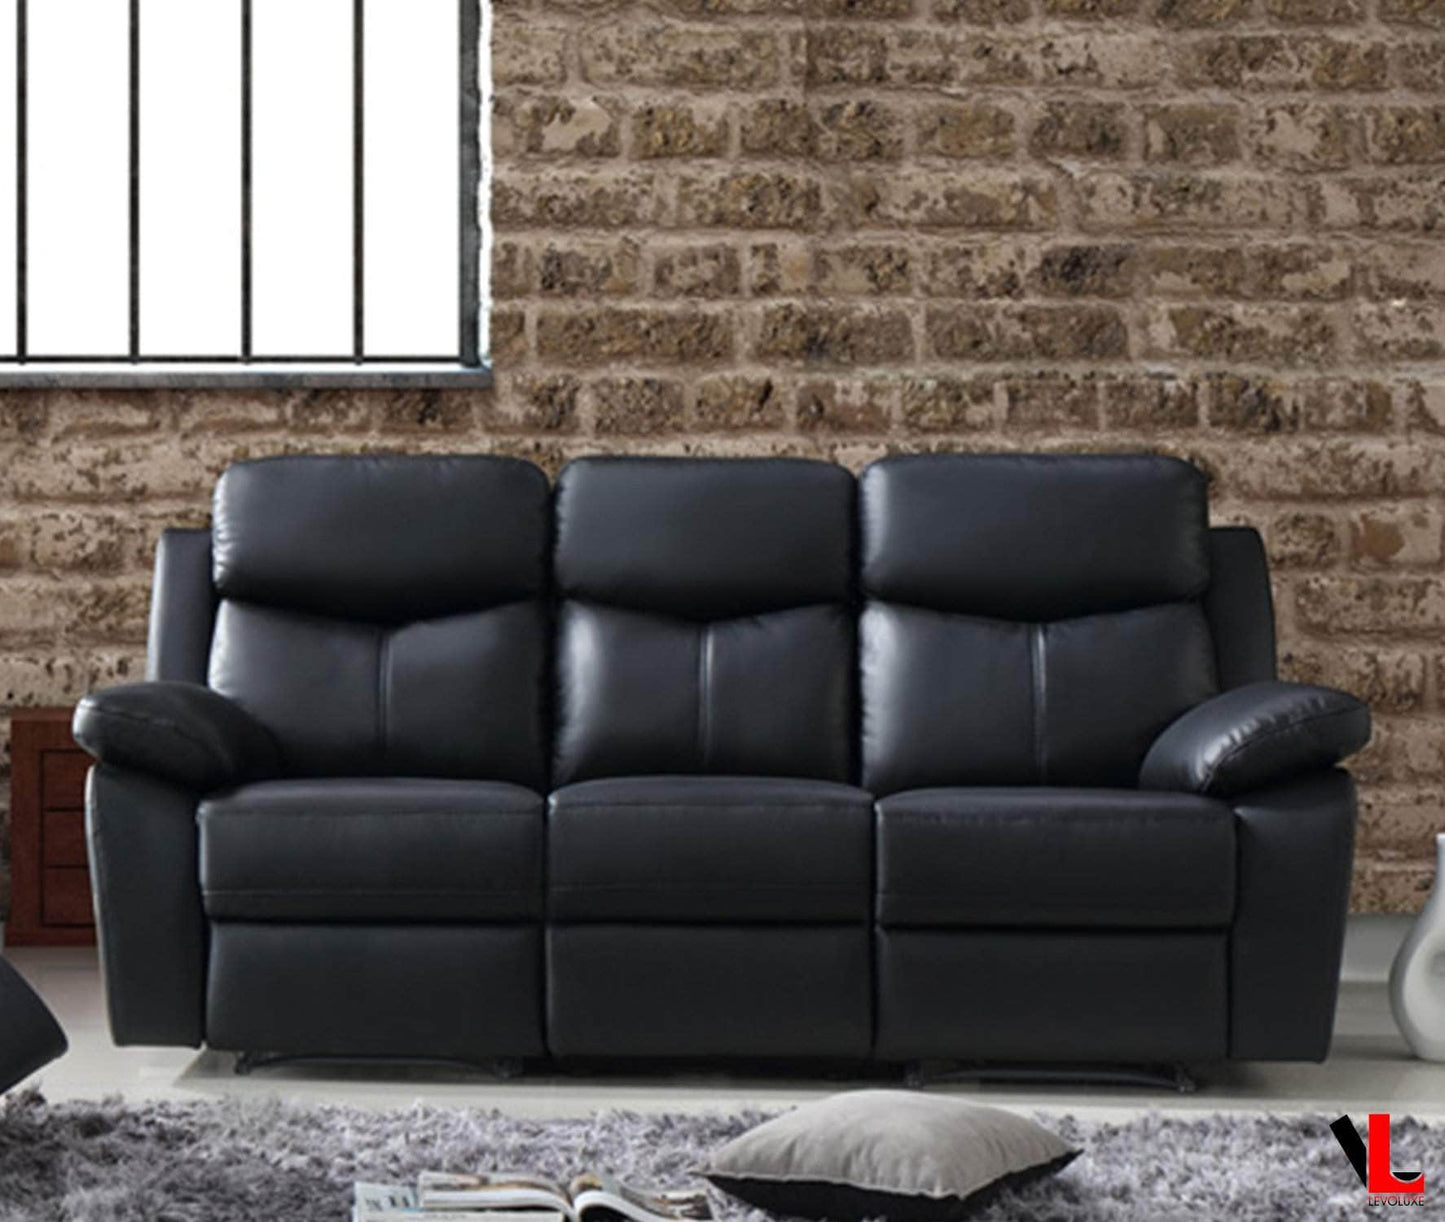 Pending - Levoluxe Black Aveon 83" Pillow Top Arm Reclining Sofa in Leather Match - Available in 2 Colours